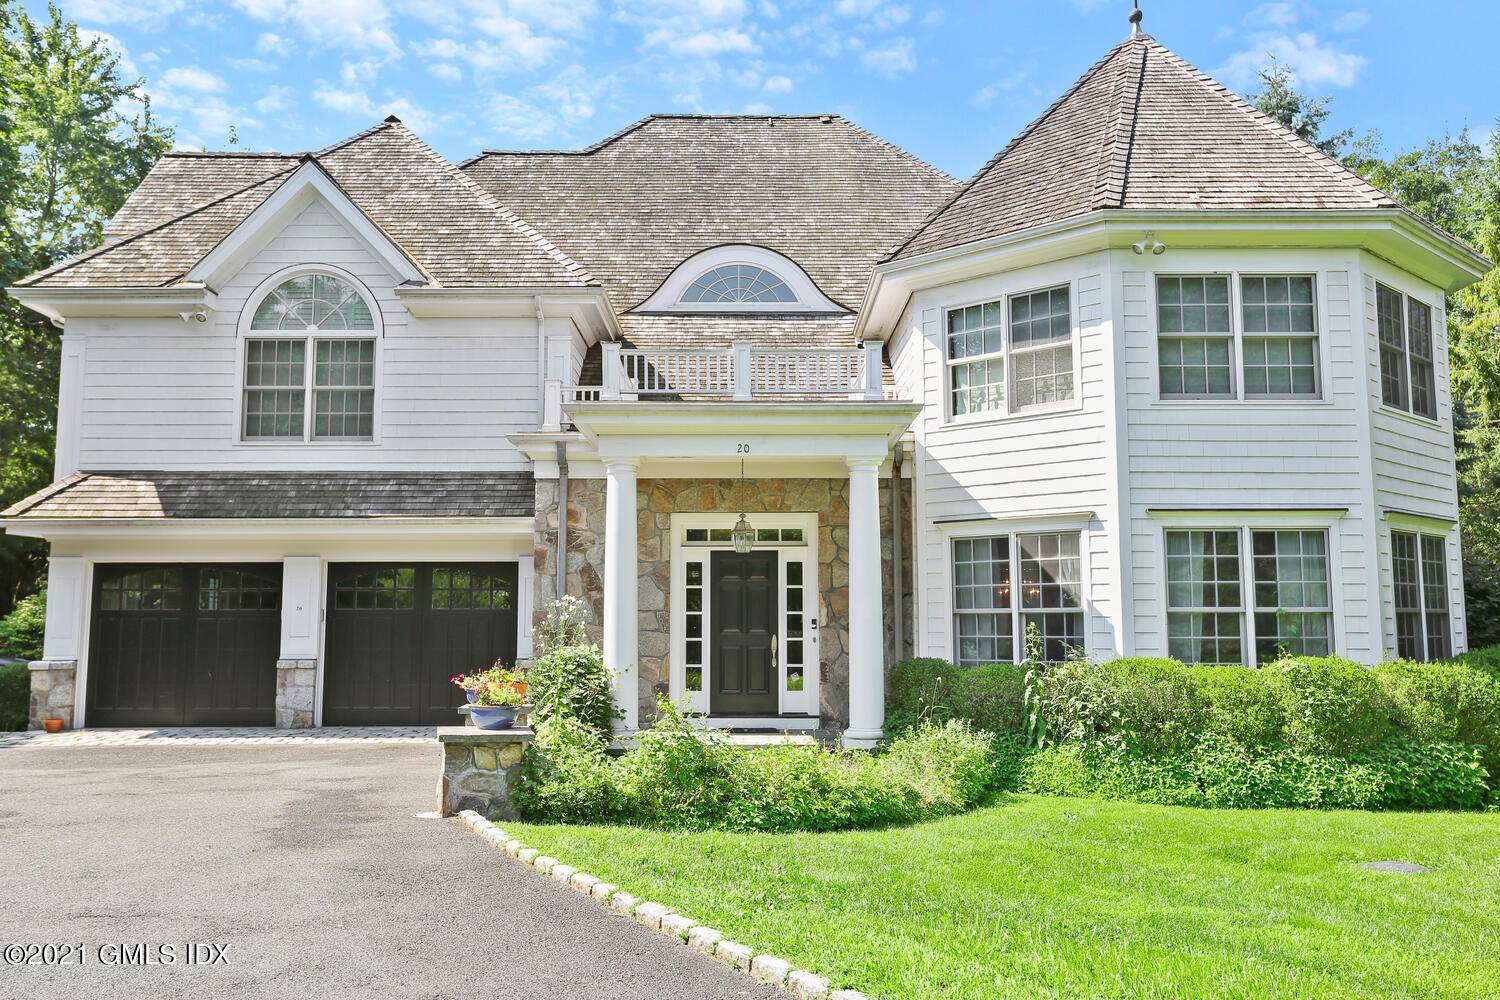 This striking shingle style open floor plan home is just seconds to town.